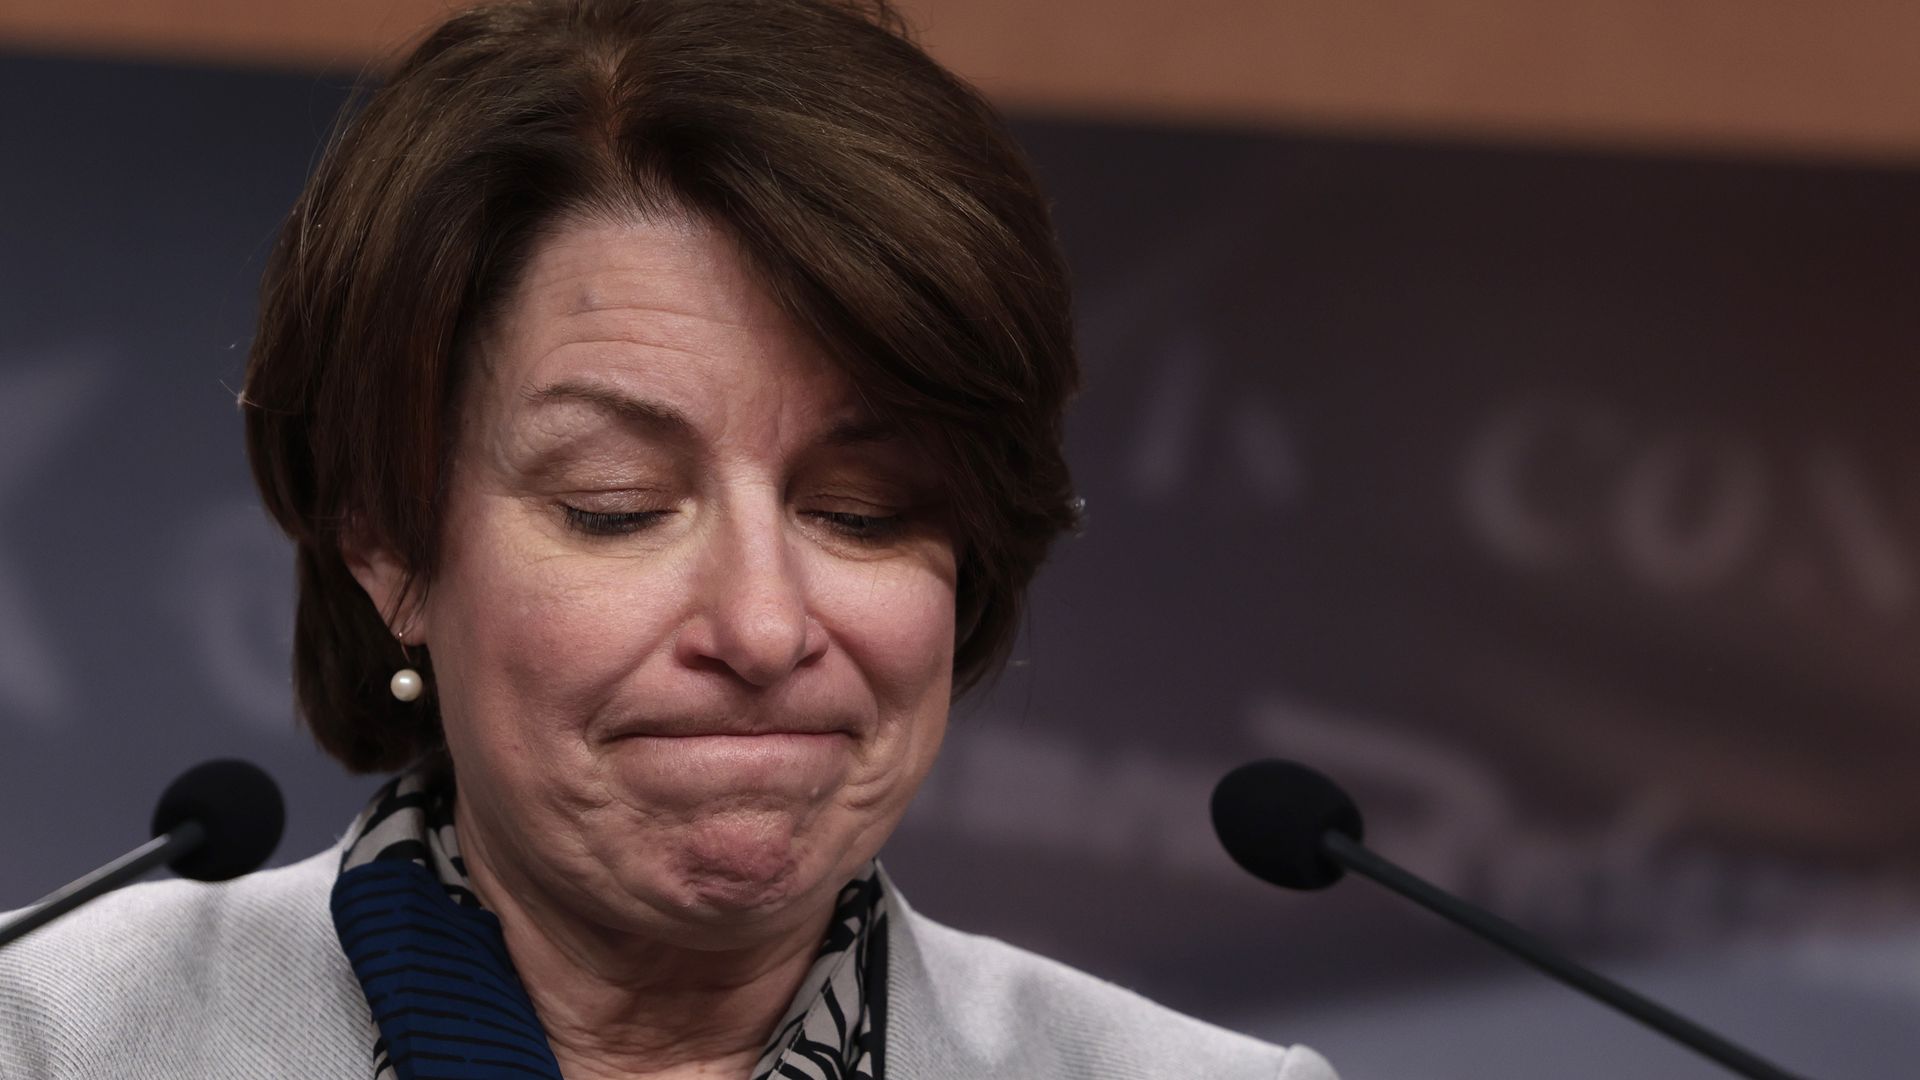 Photo of Sen. Amy Klobuchar's face with her lips pursed